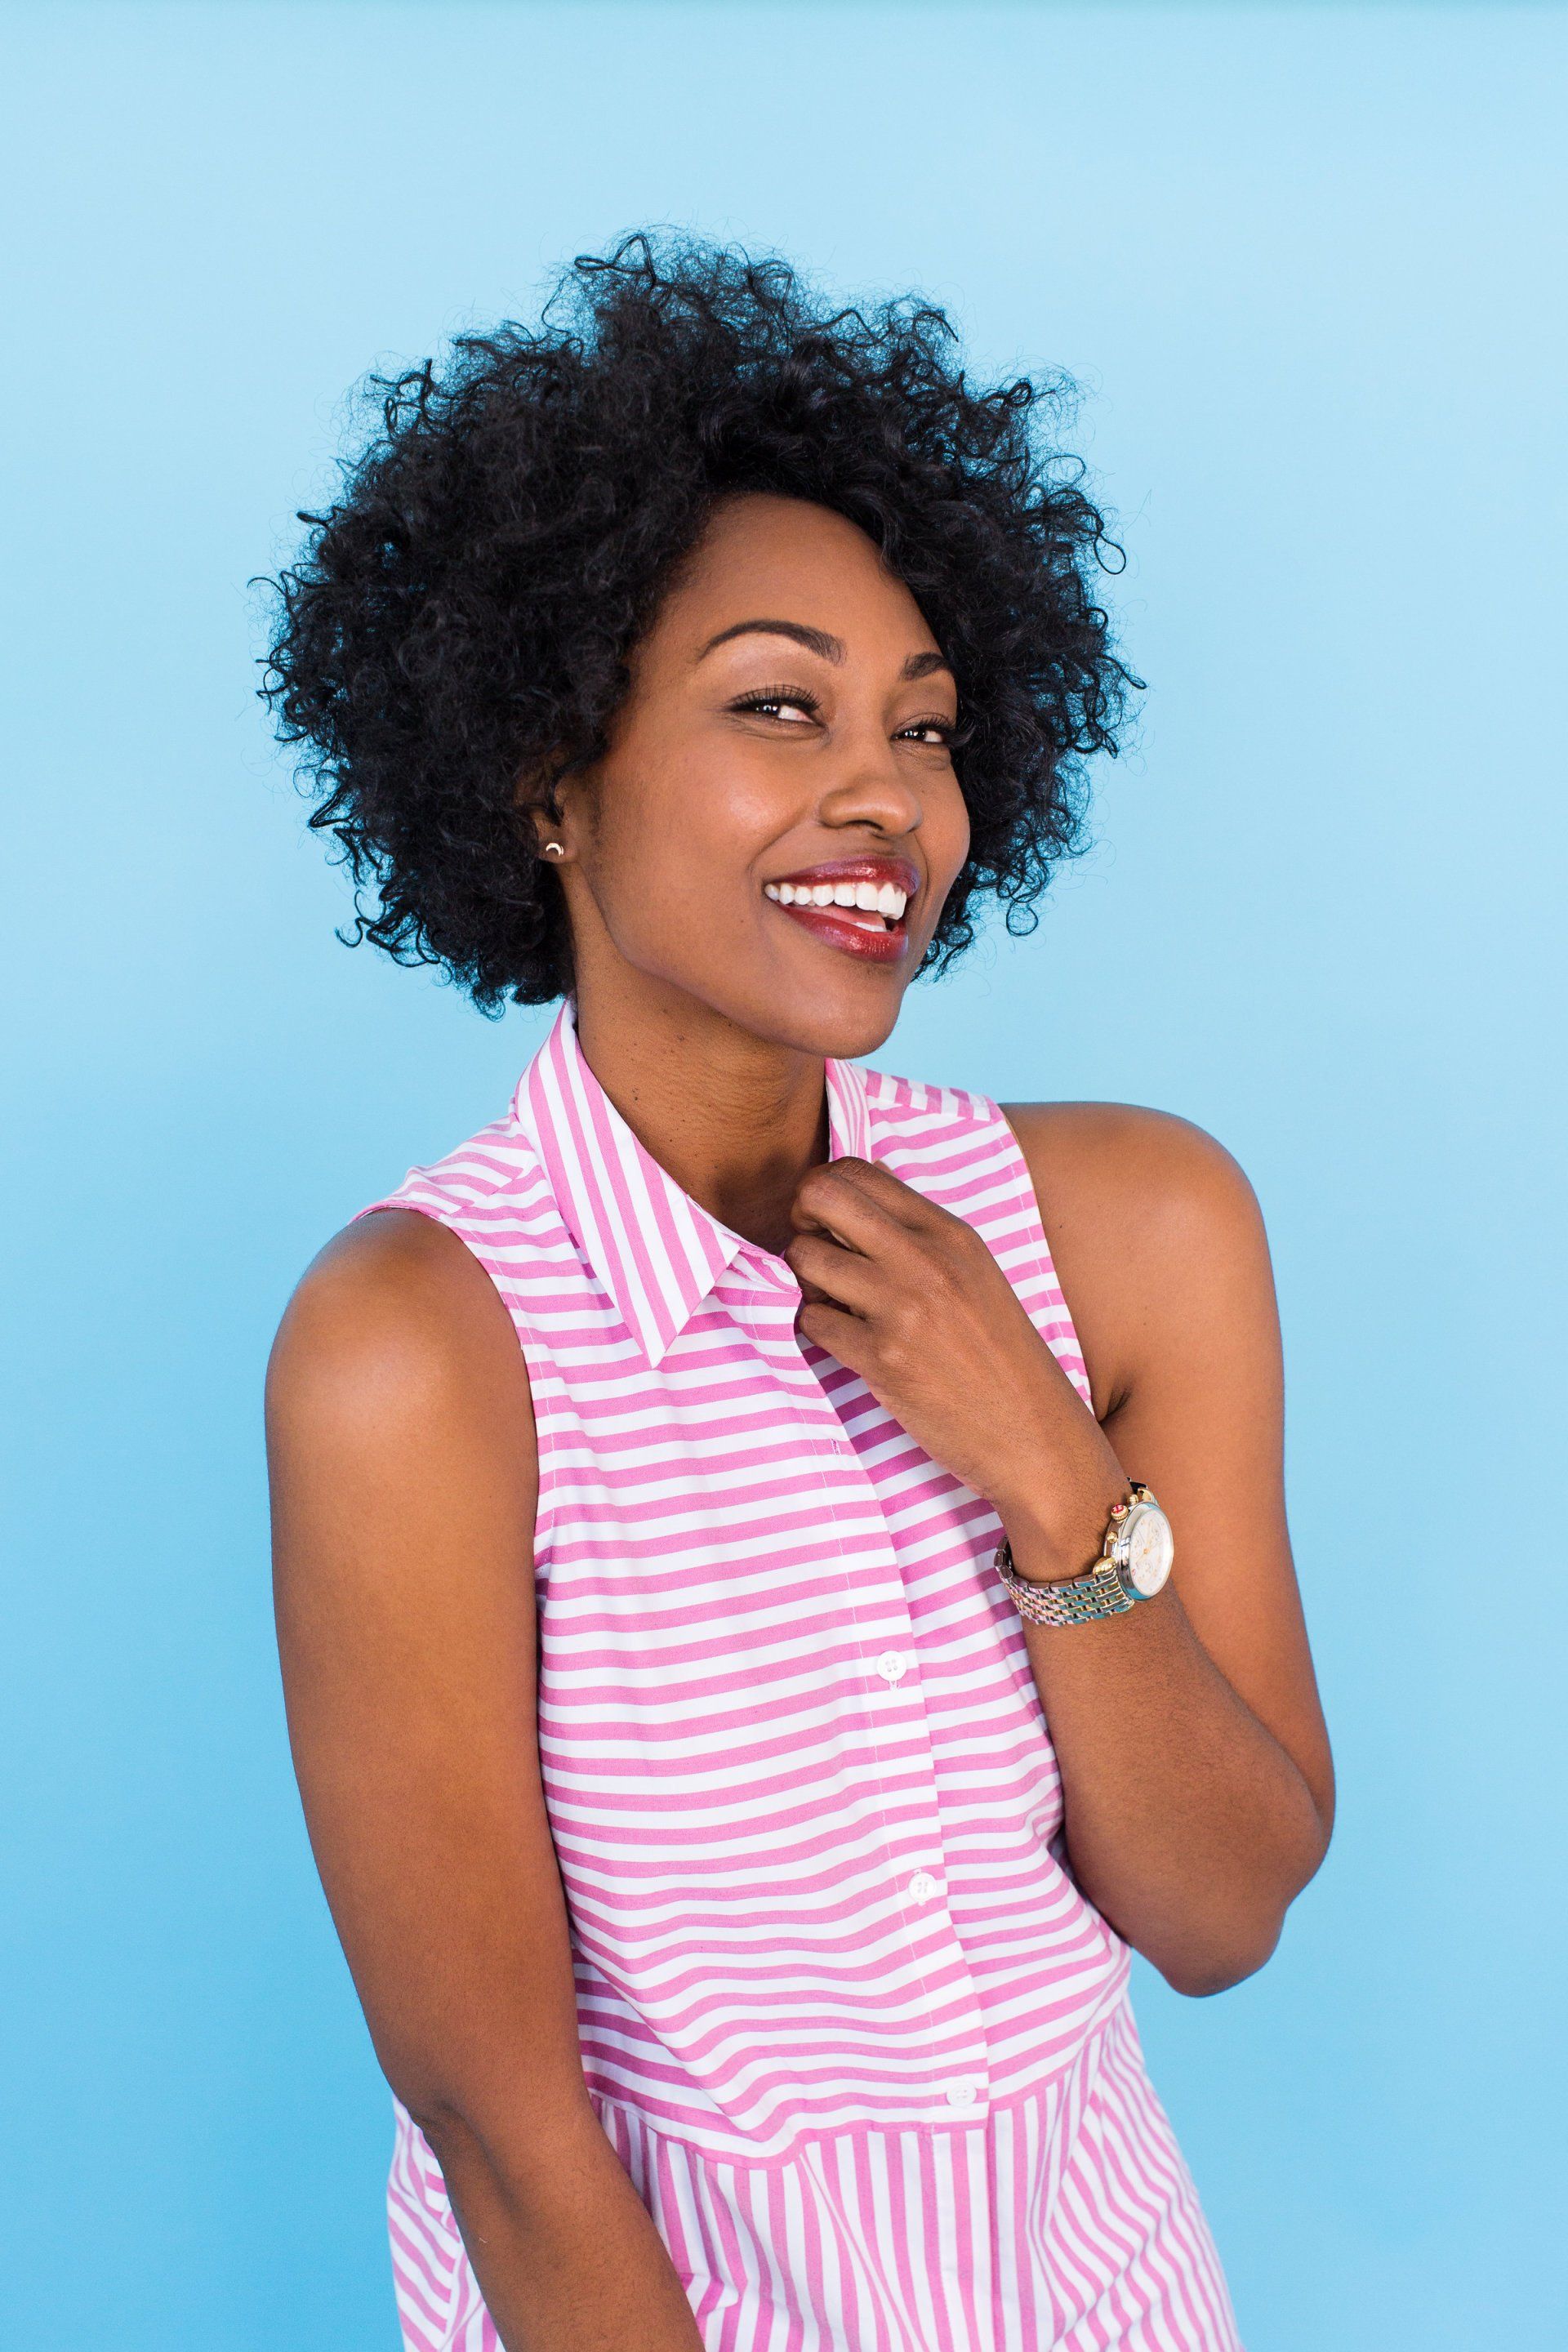 A woman in a pink and white striped shirt is smiling.